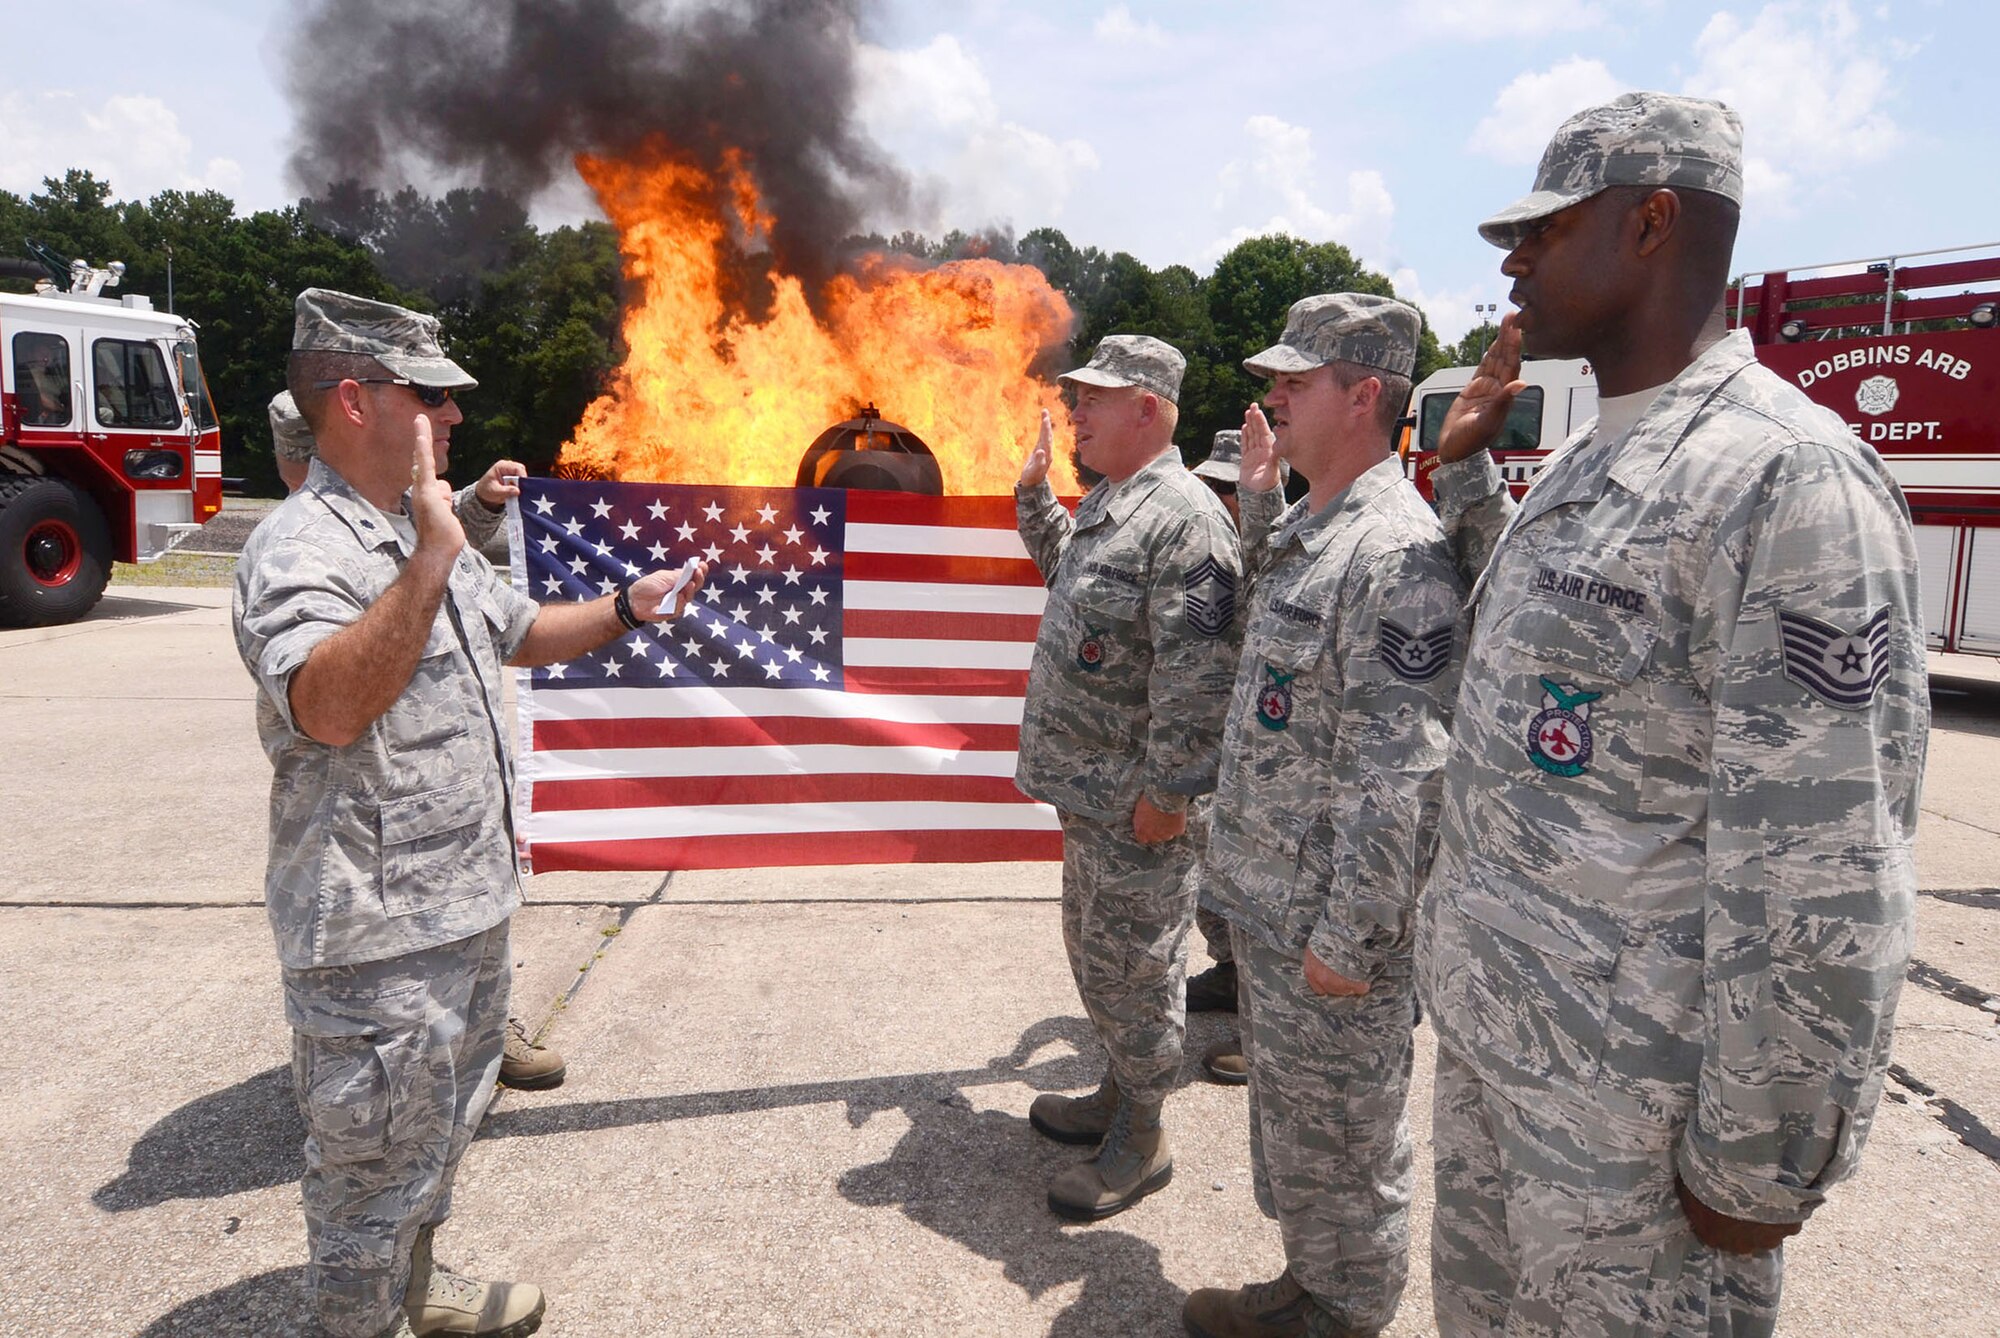 Chief Master Sgt. Zenith L. Parker, Tech. Sgt. Thomas Lane, (center) and Tech. Sgt. Quincy Davis from the 94th Civil Engineer Squadron Fire Department reenlist at the aircraft burn simulator, Dobbins Air Reserve Base, Ga. July 13, 2014. The oath was rendered by Lt. Col.  Scott A. Carlin, 94th Civil Engineer Squadron commander. (U.S. Air Force photo/Don Peek)